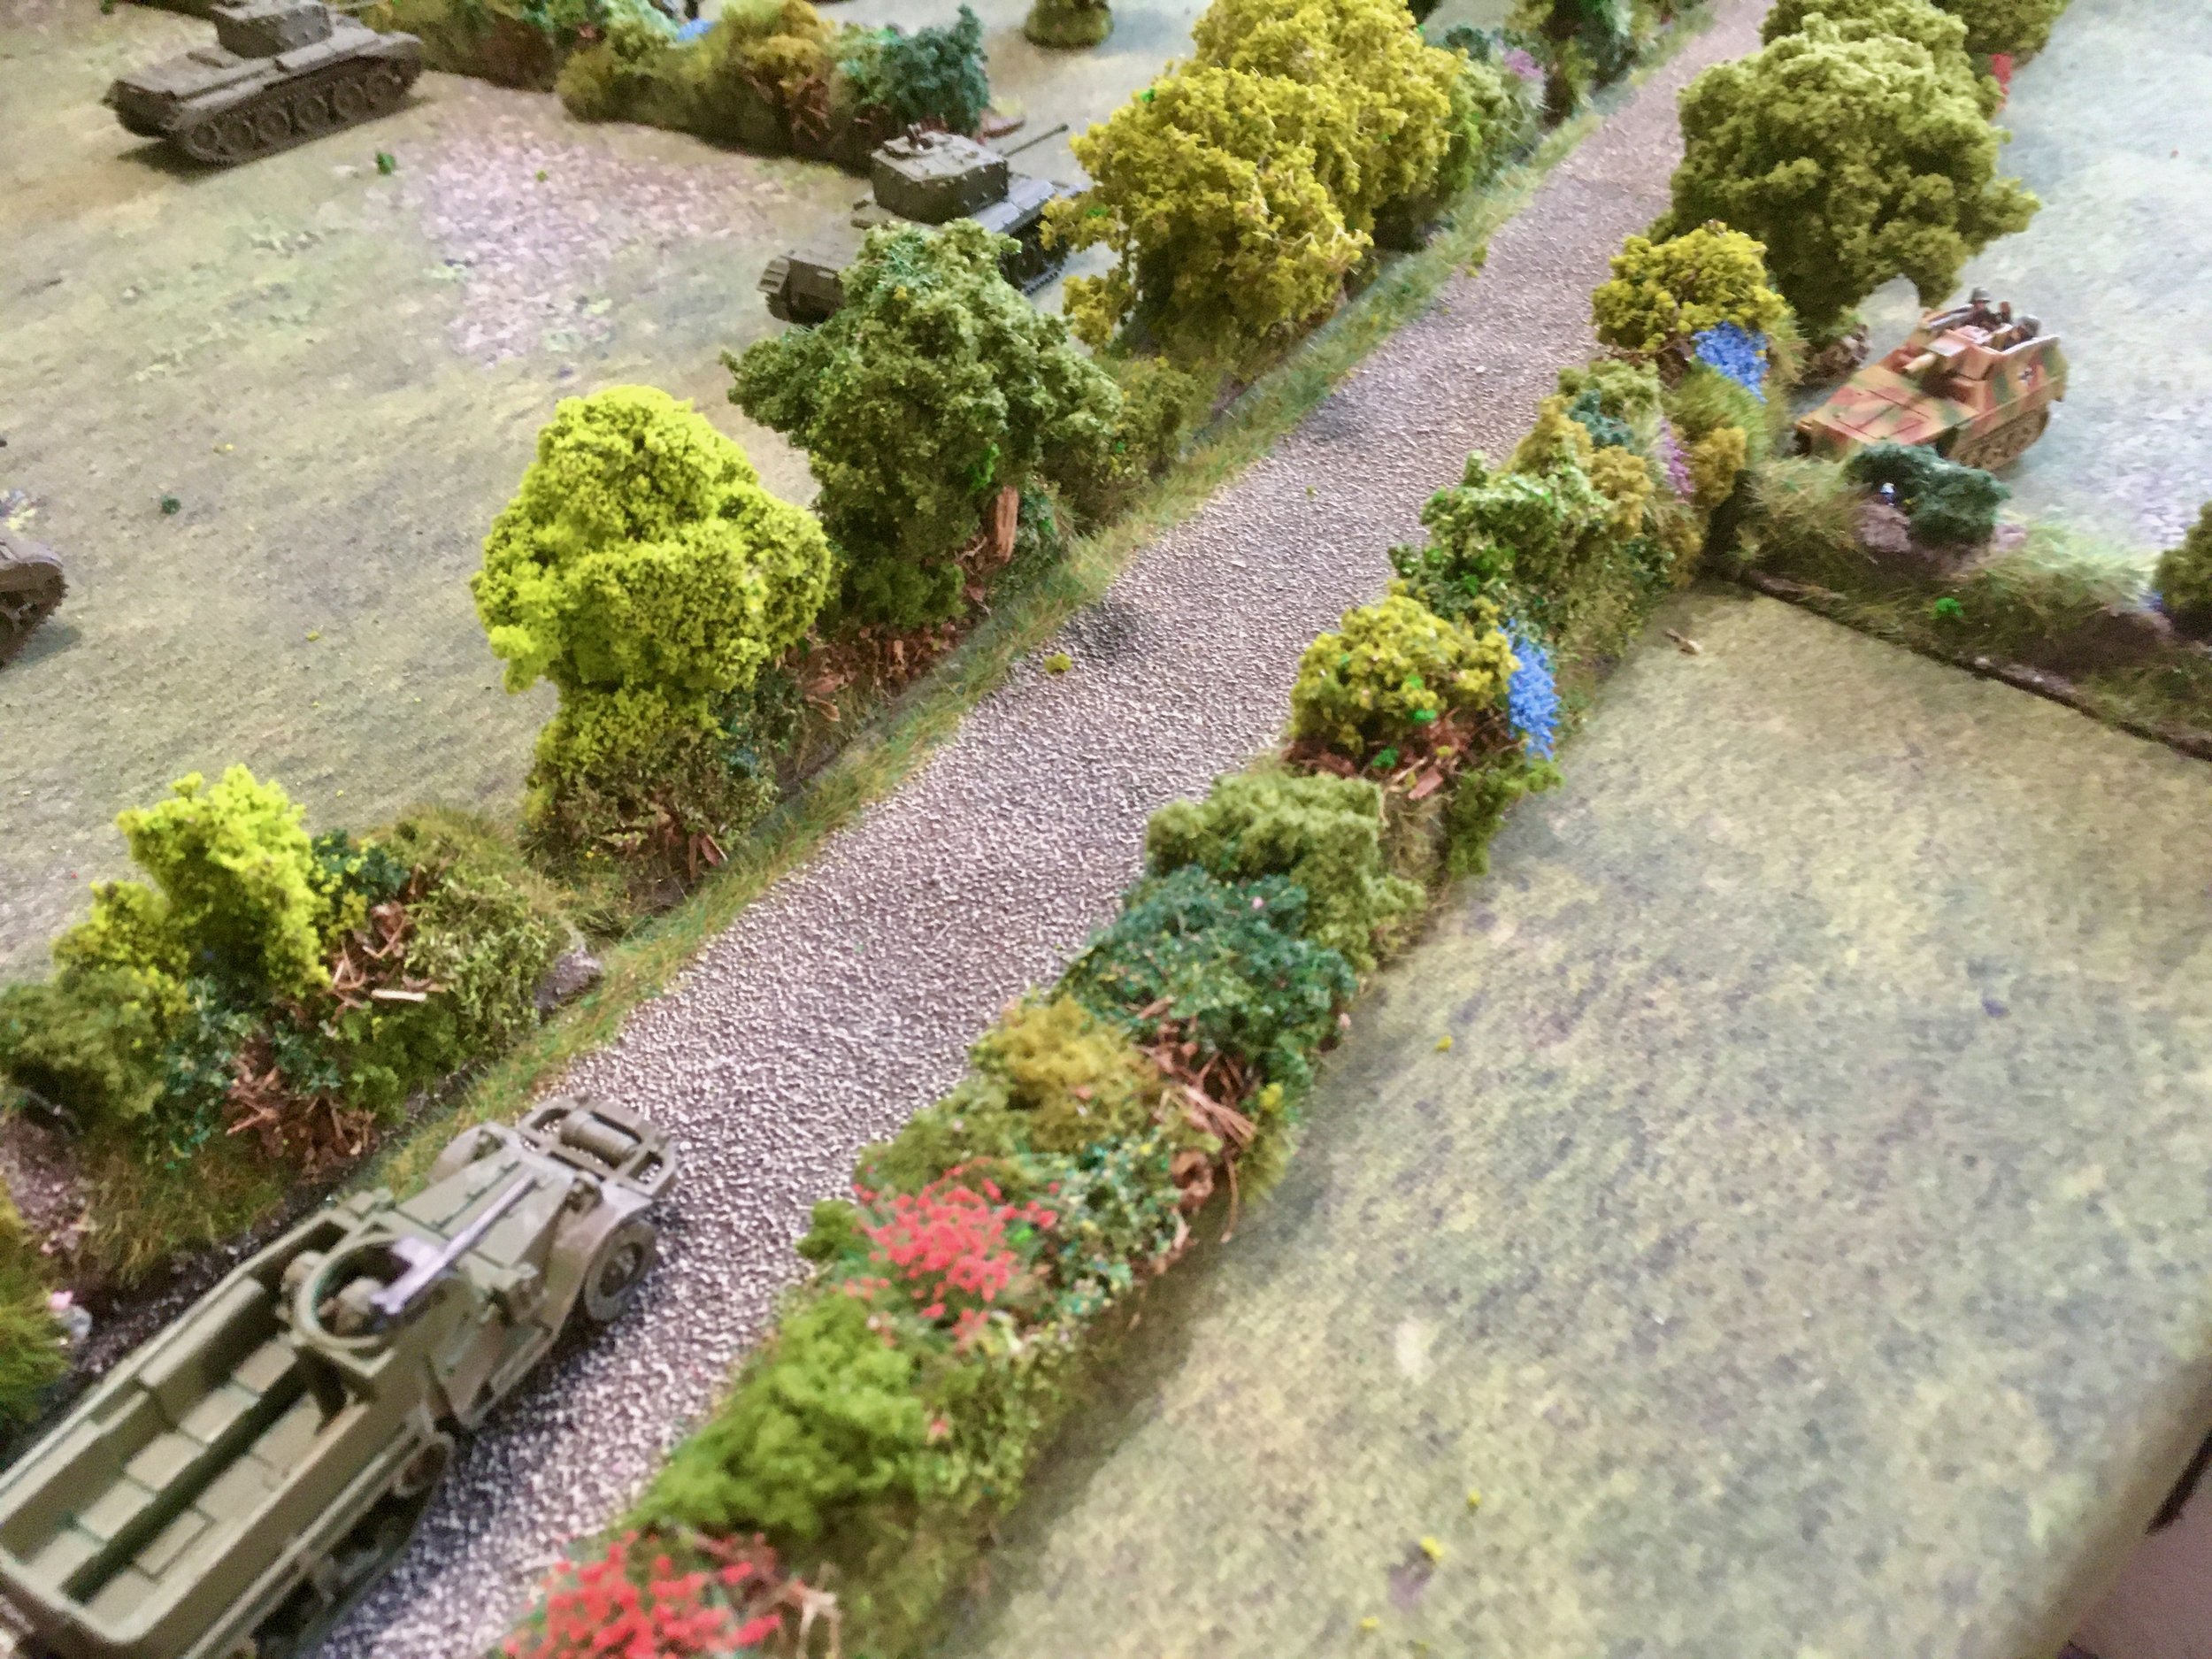 To compound the Welsh Guards cracking start, an SdKfz 250/8 appeared behind a hedge...